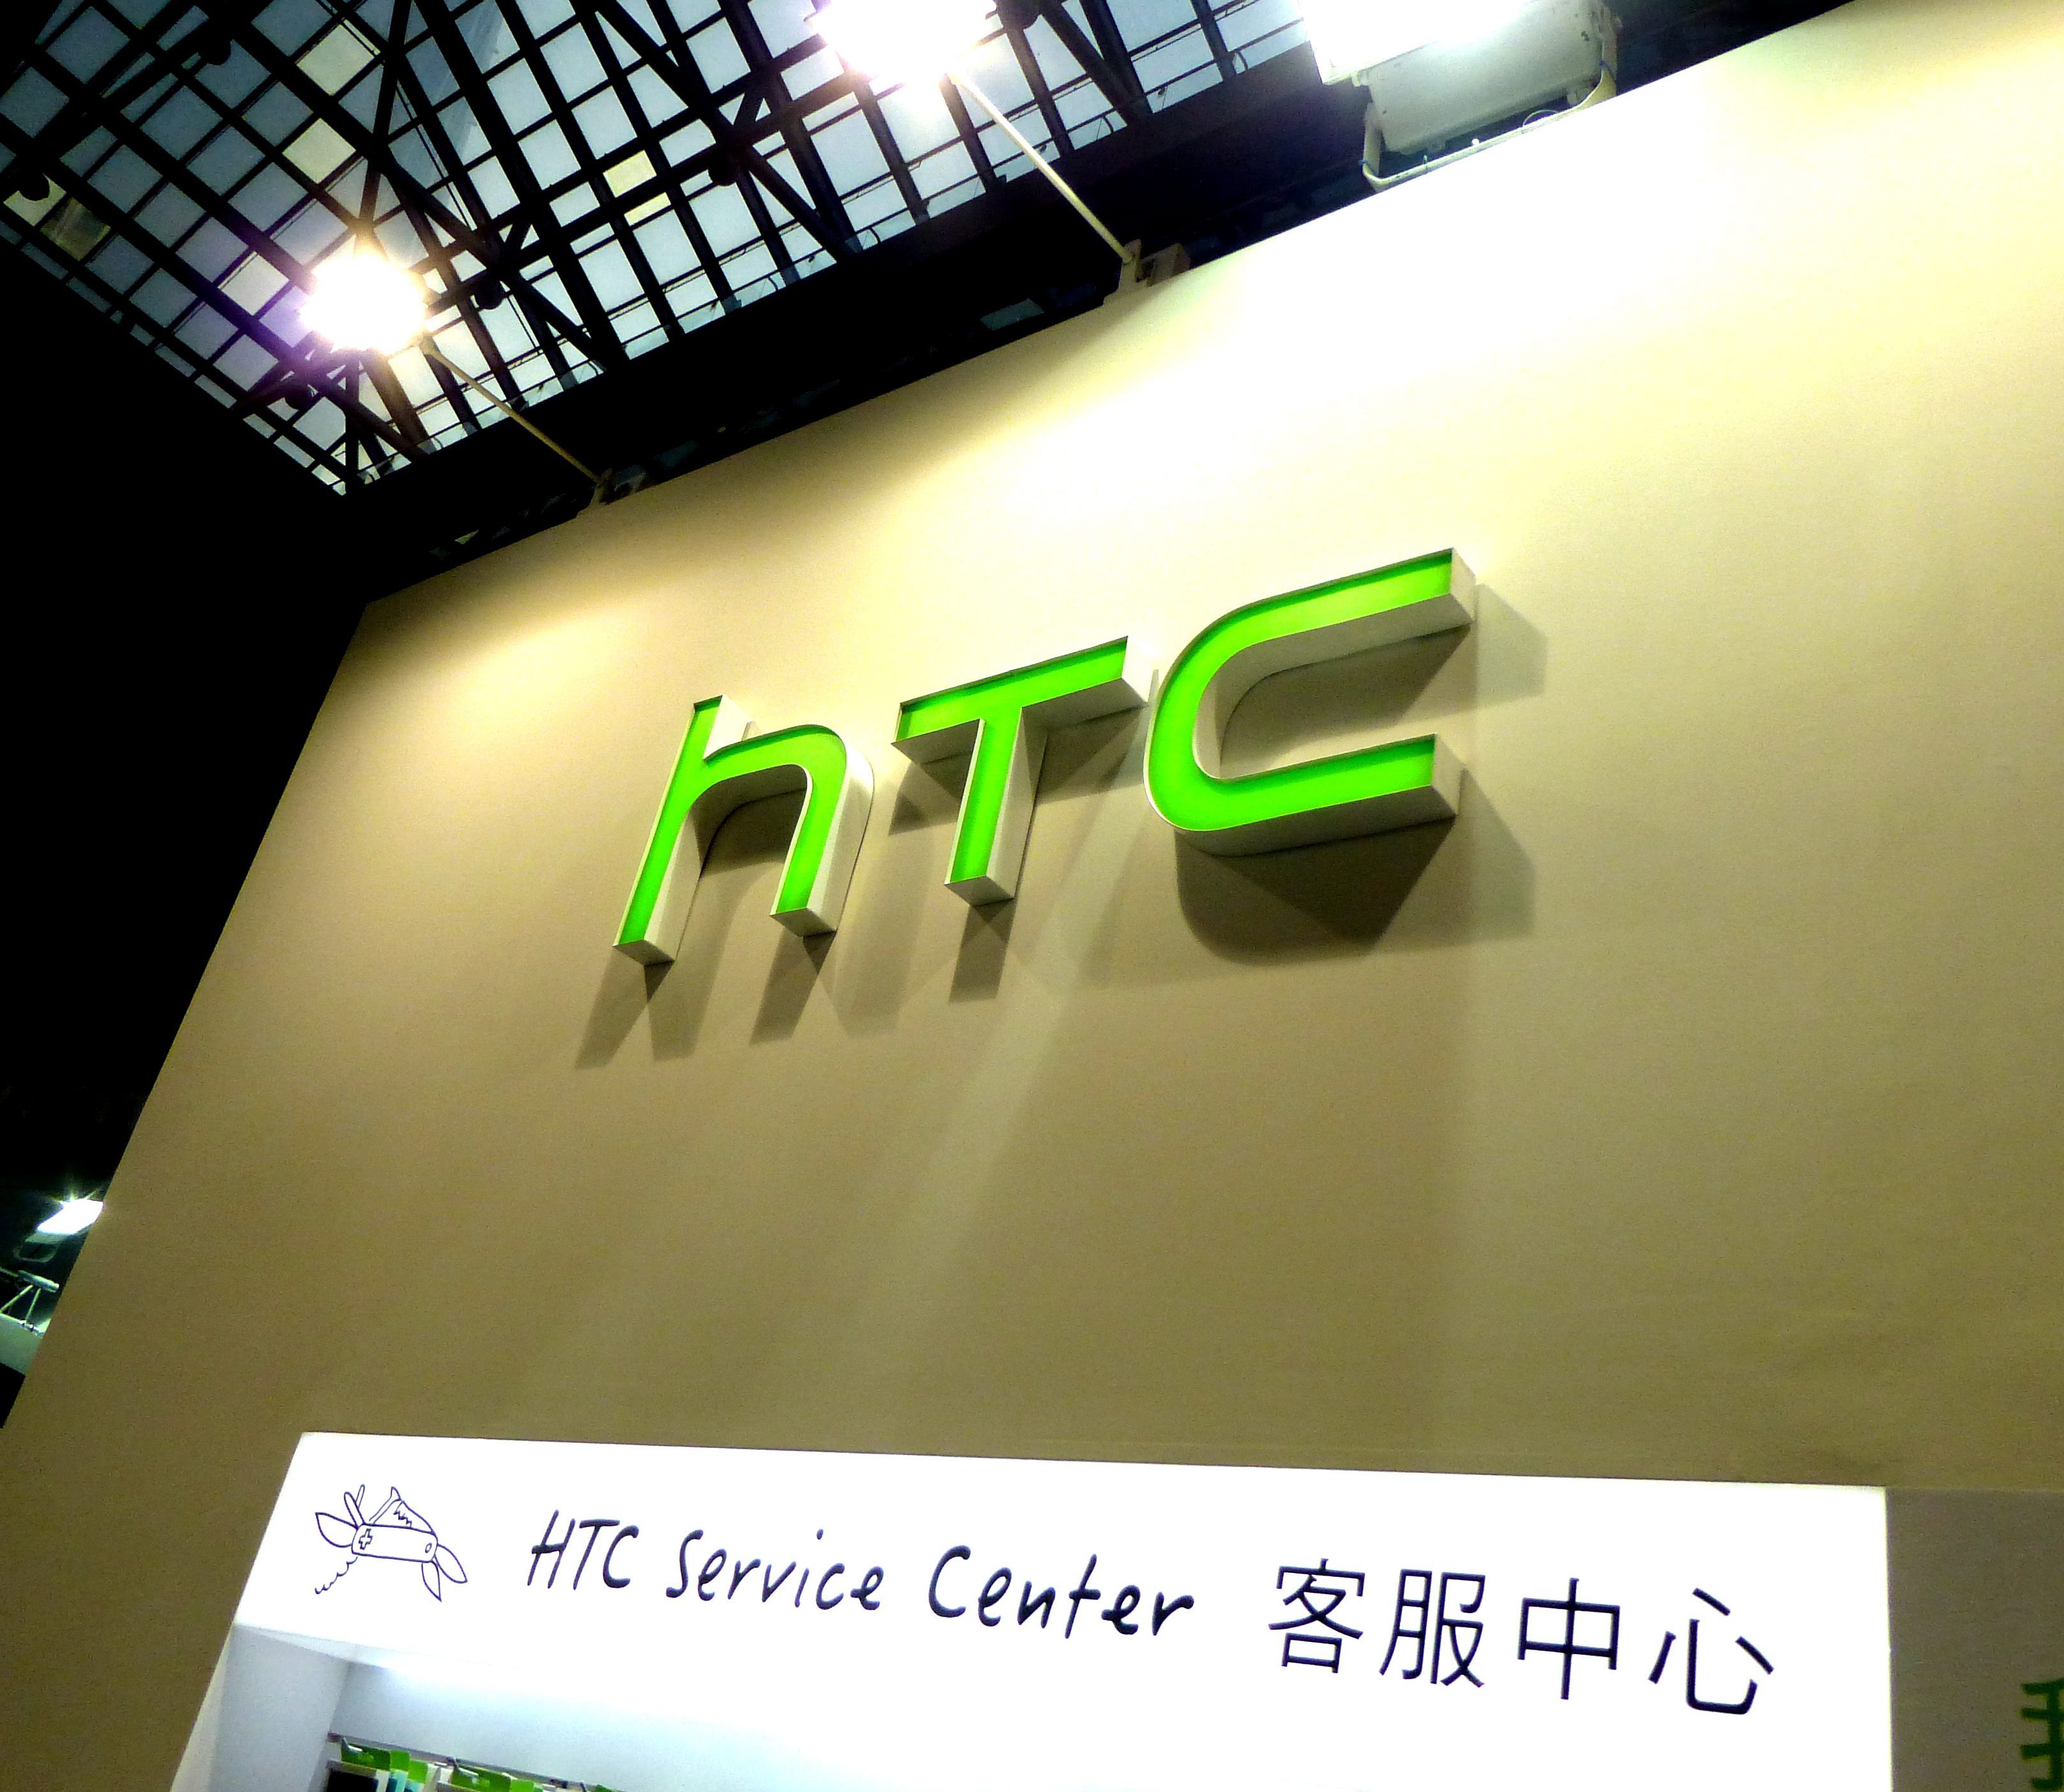 Taiwanese smartphone maker HTC has laid off 30 employees to “optimize our organisation and improve efficiencies after several years of aggressive growth”. Photo: EPA